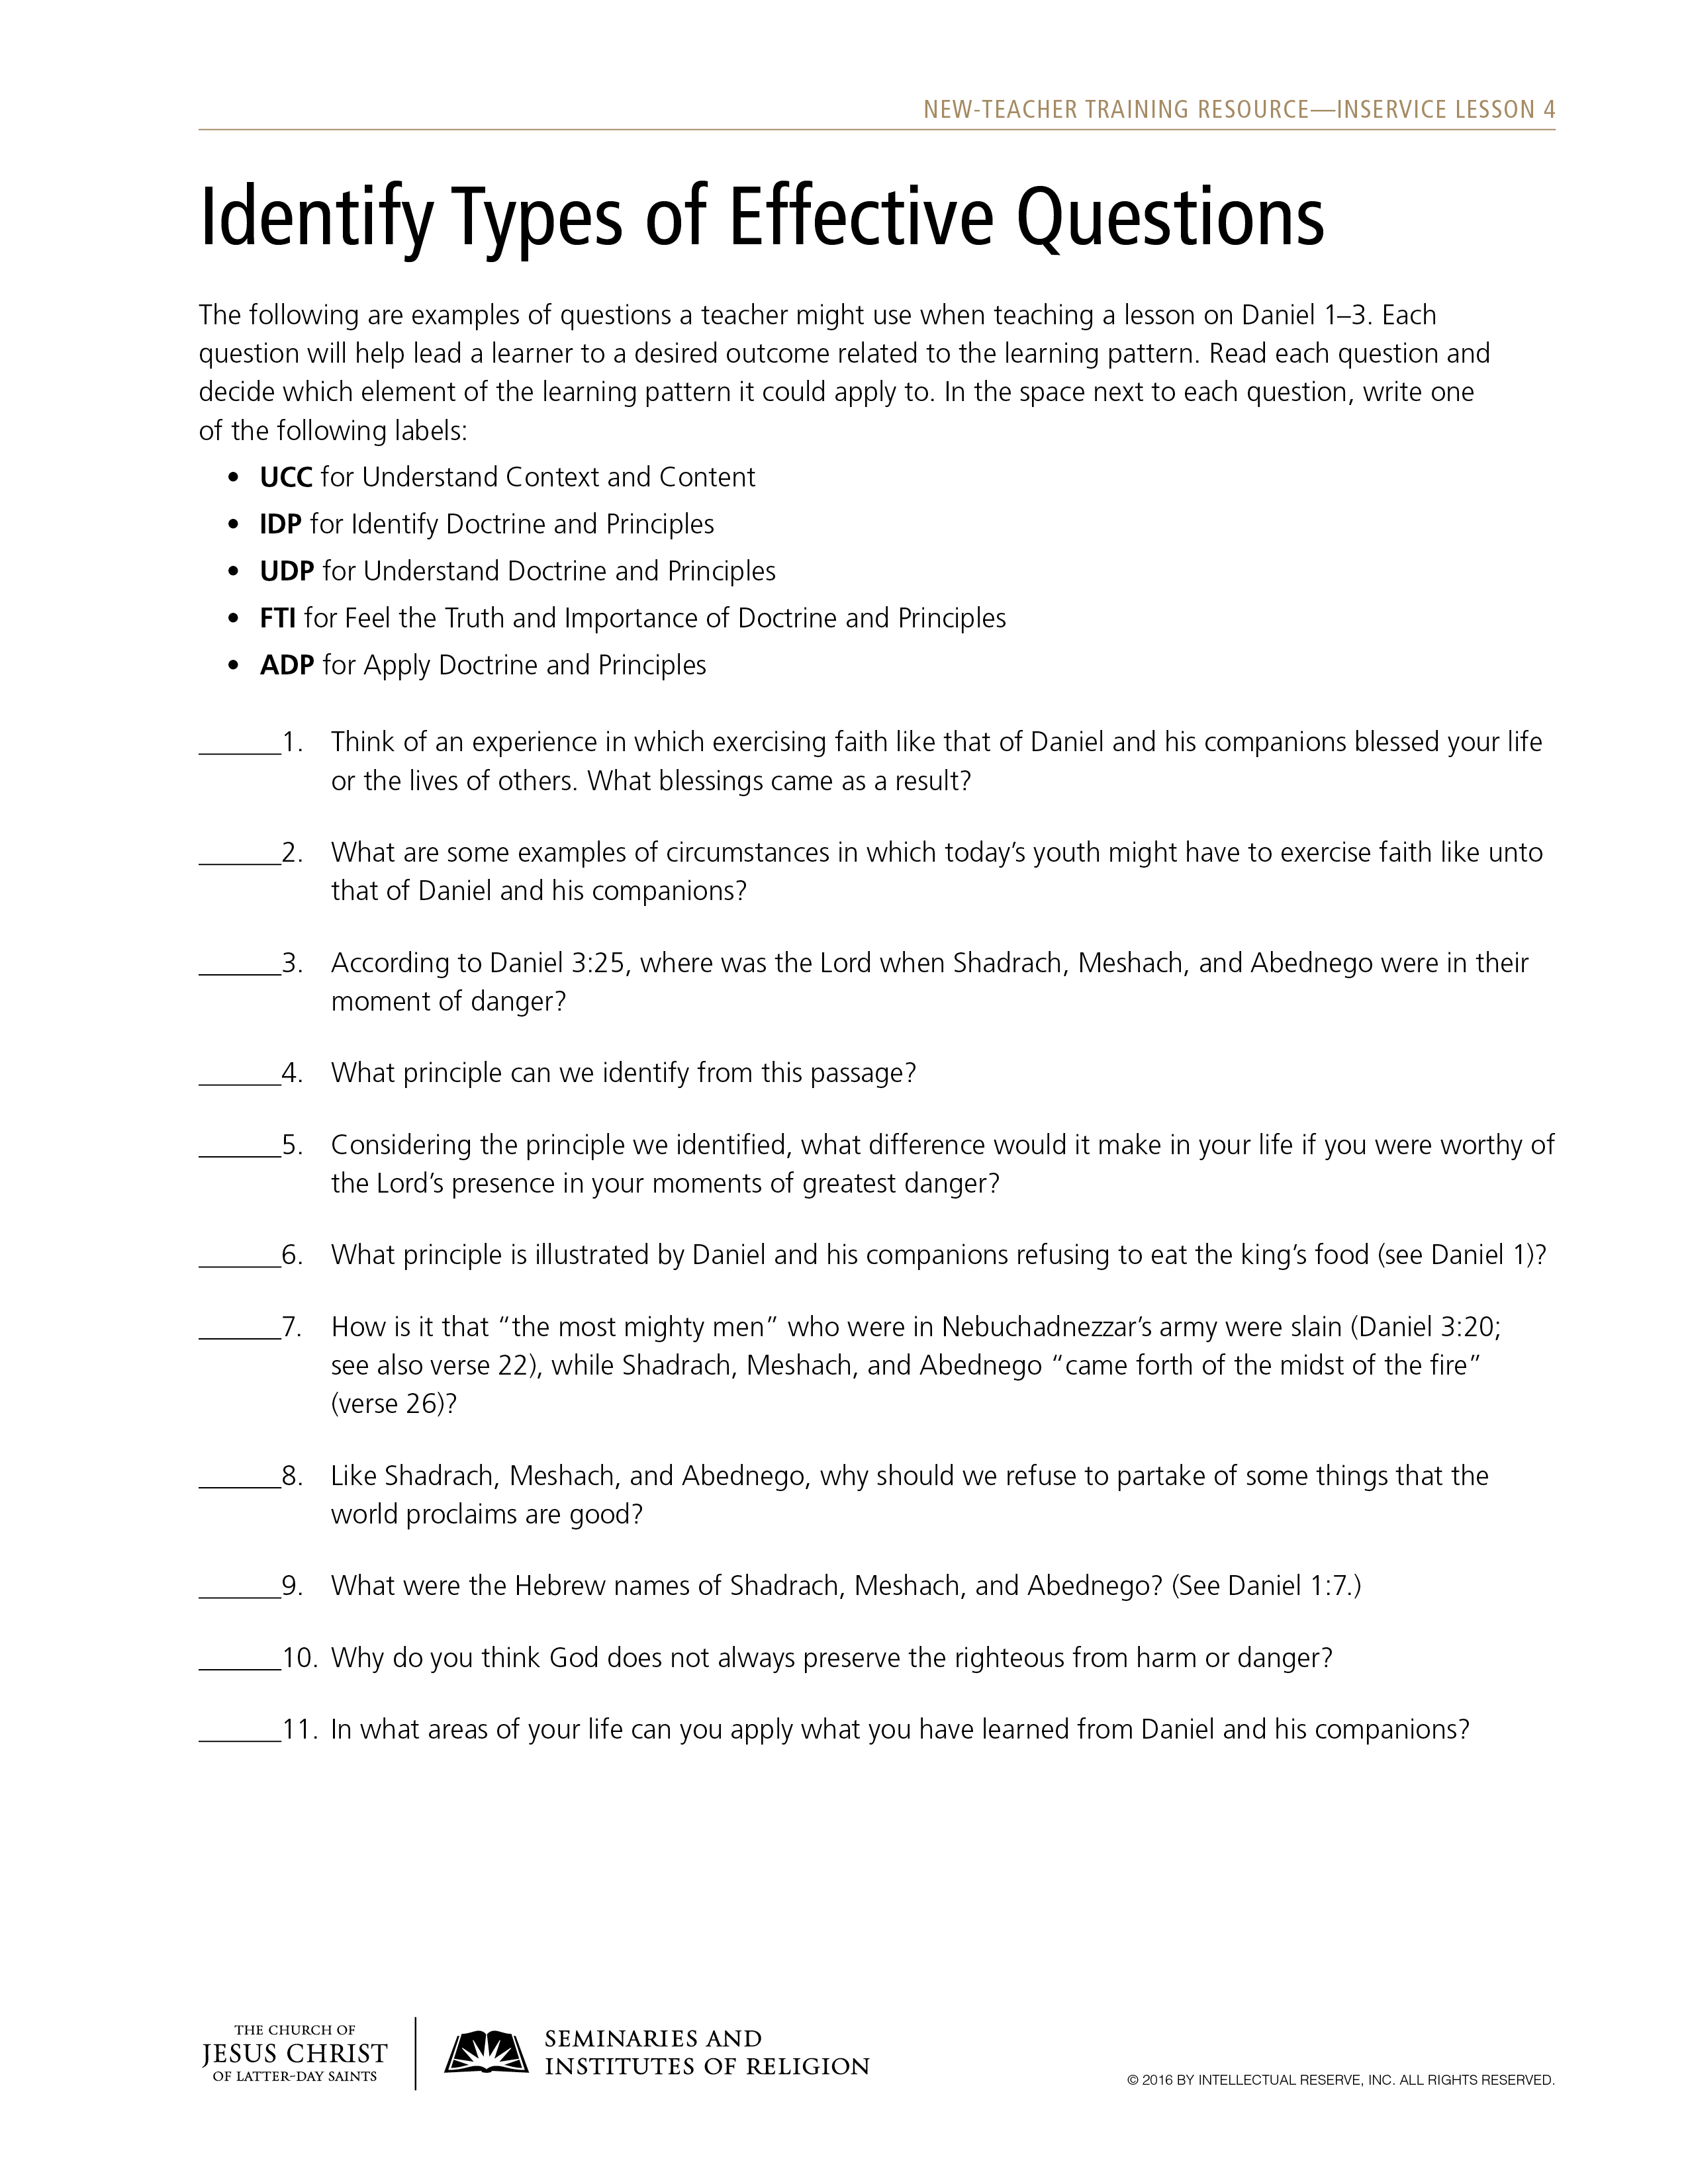 handout, Identify Types of Effective Questions